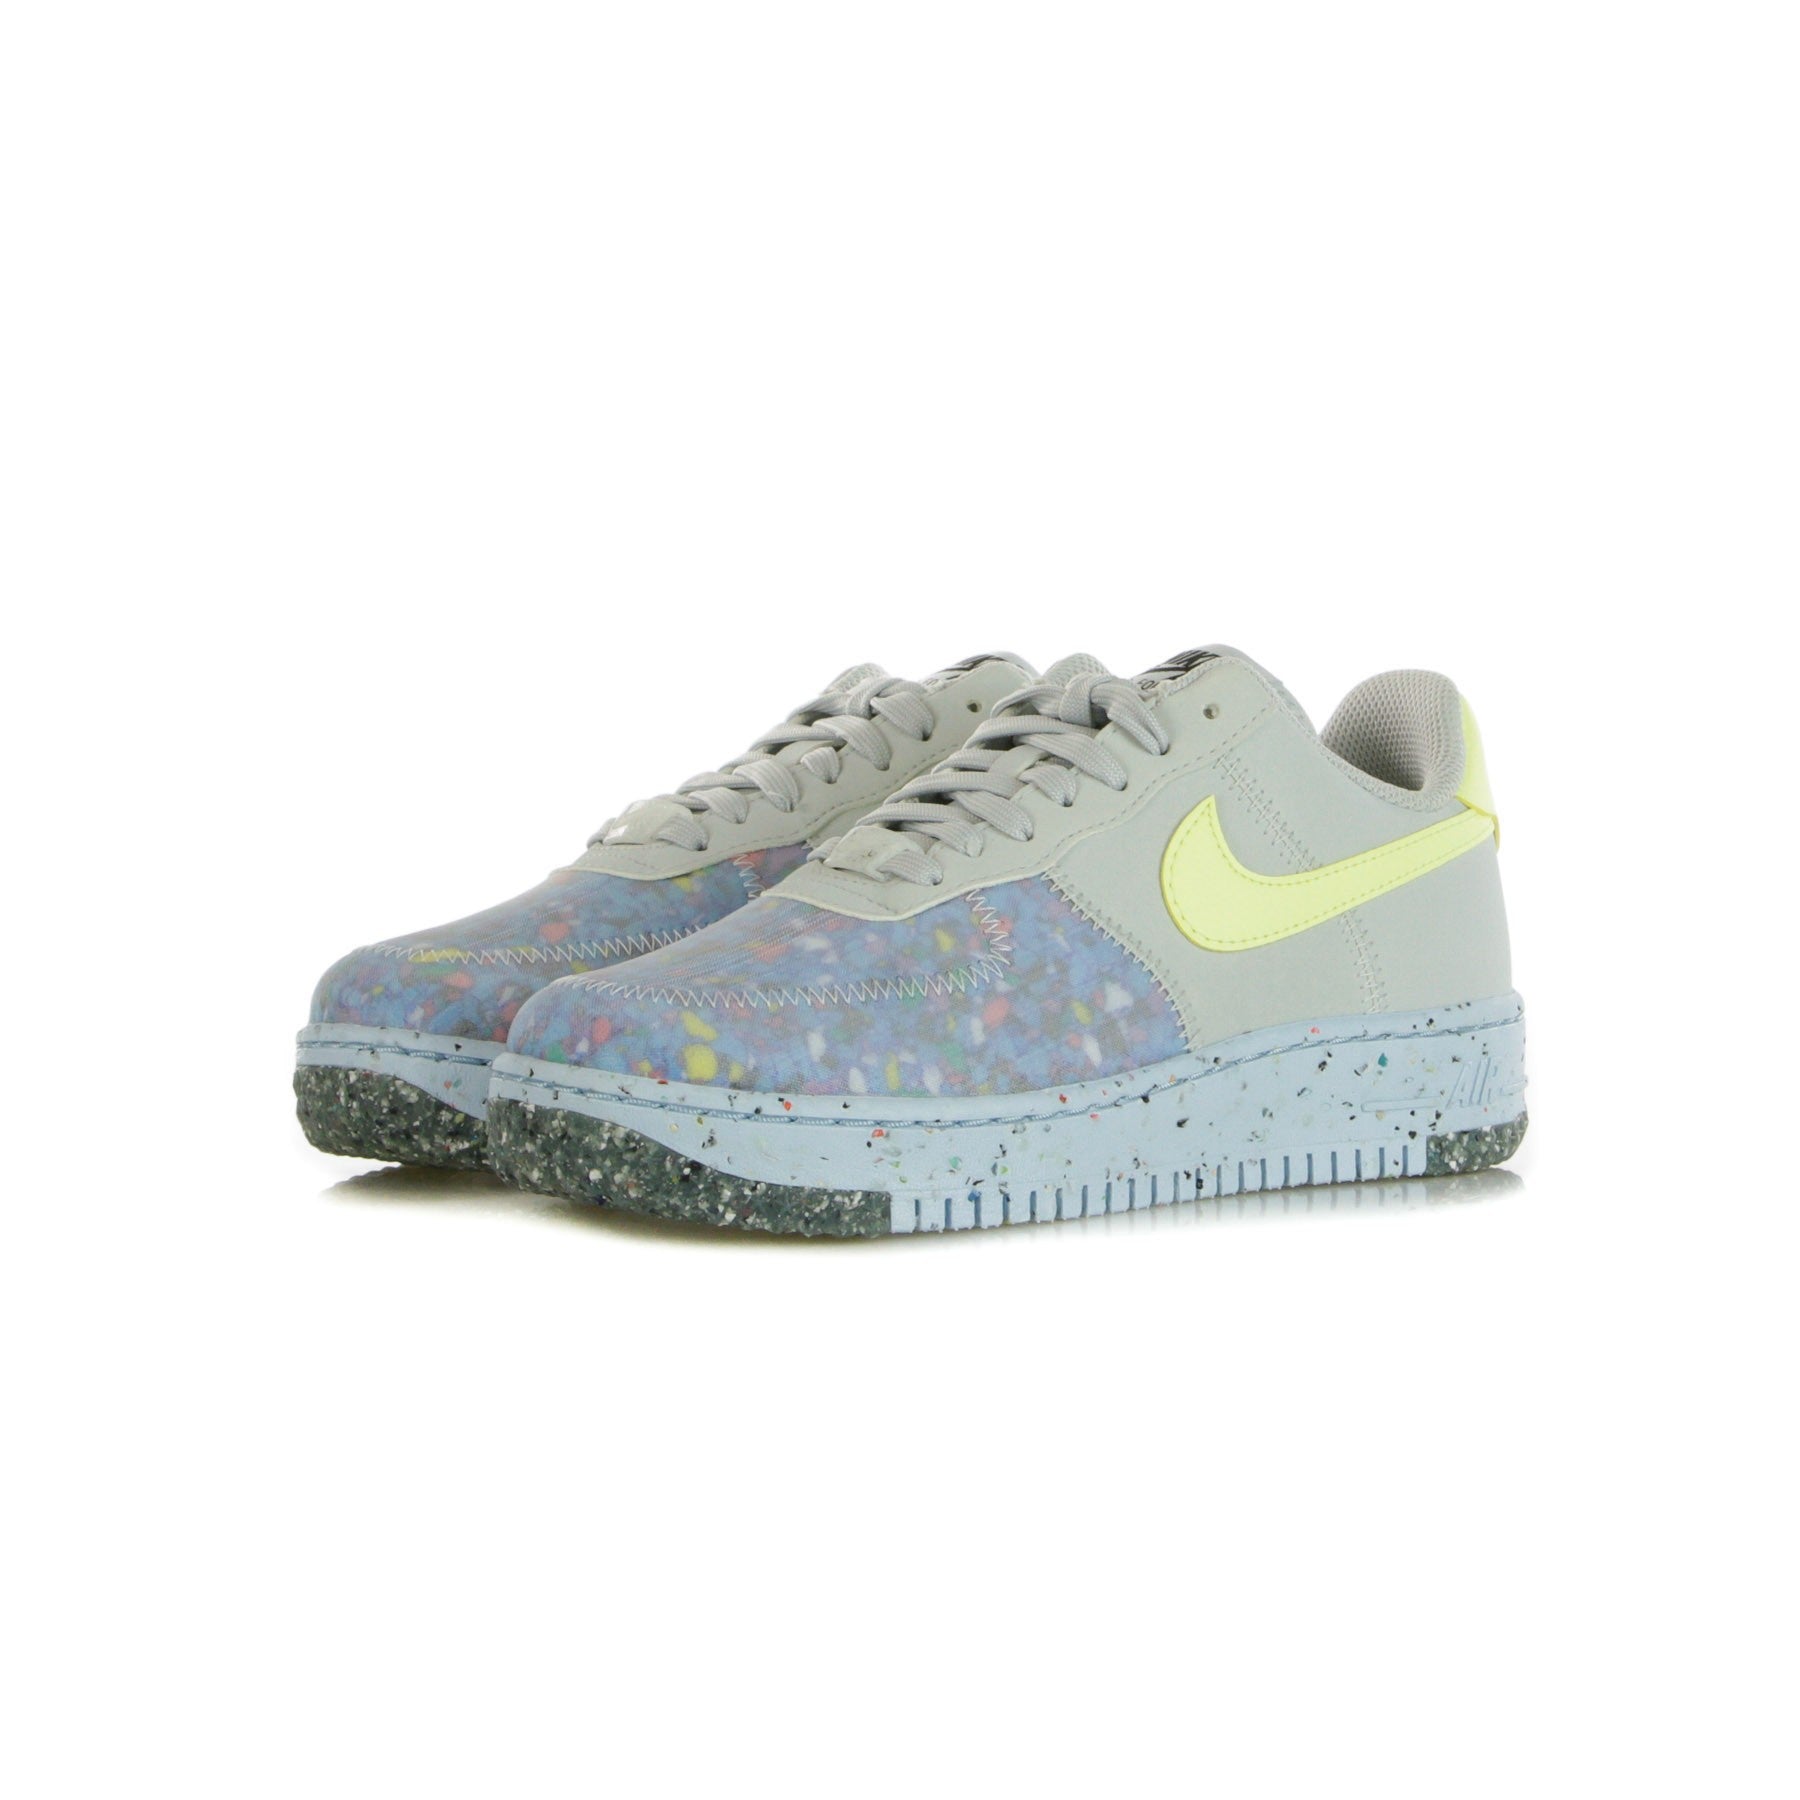 W Air Force 1 Crater Pure Platinum/barely Volt/summit White Women's Low Shoe